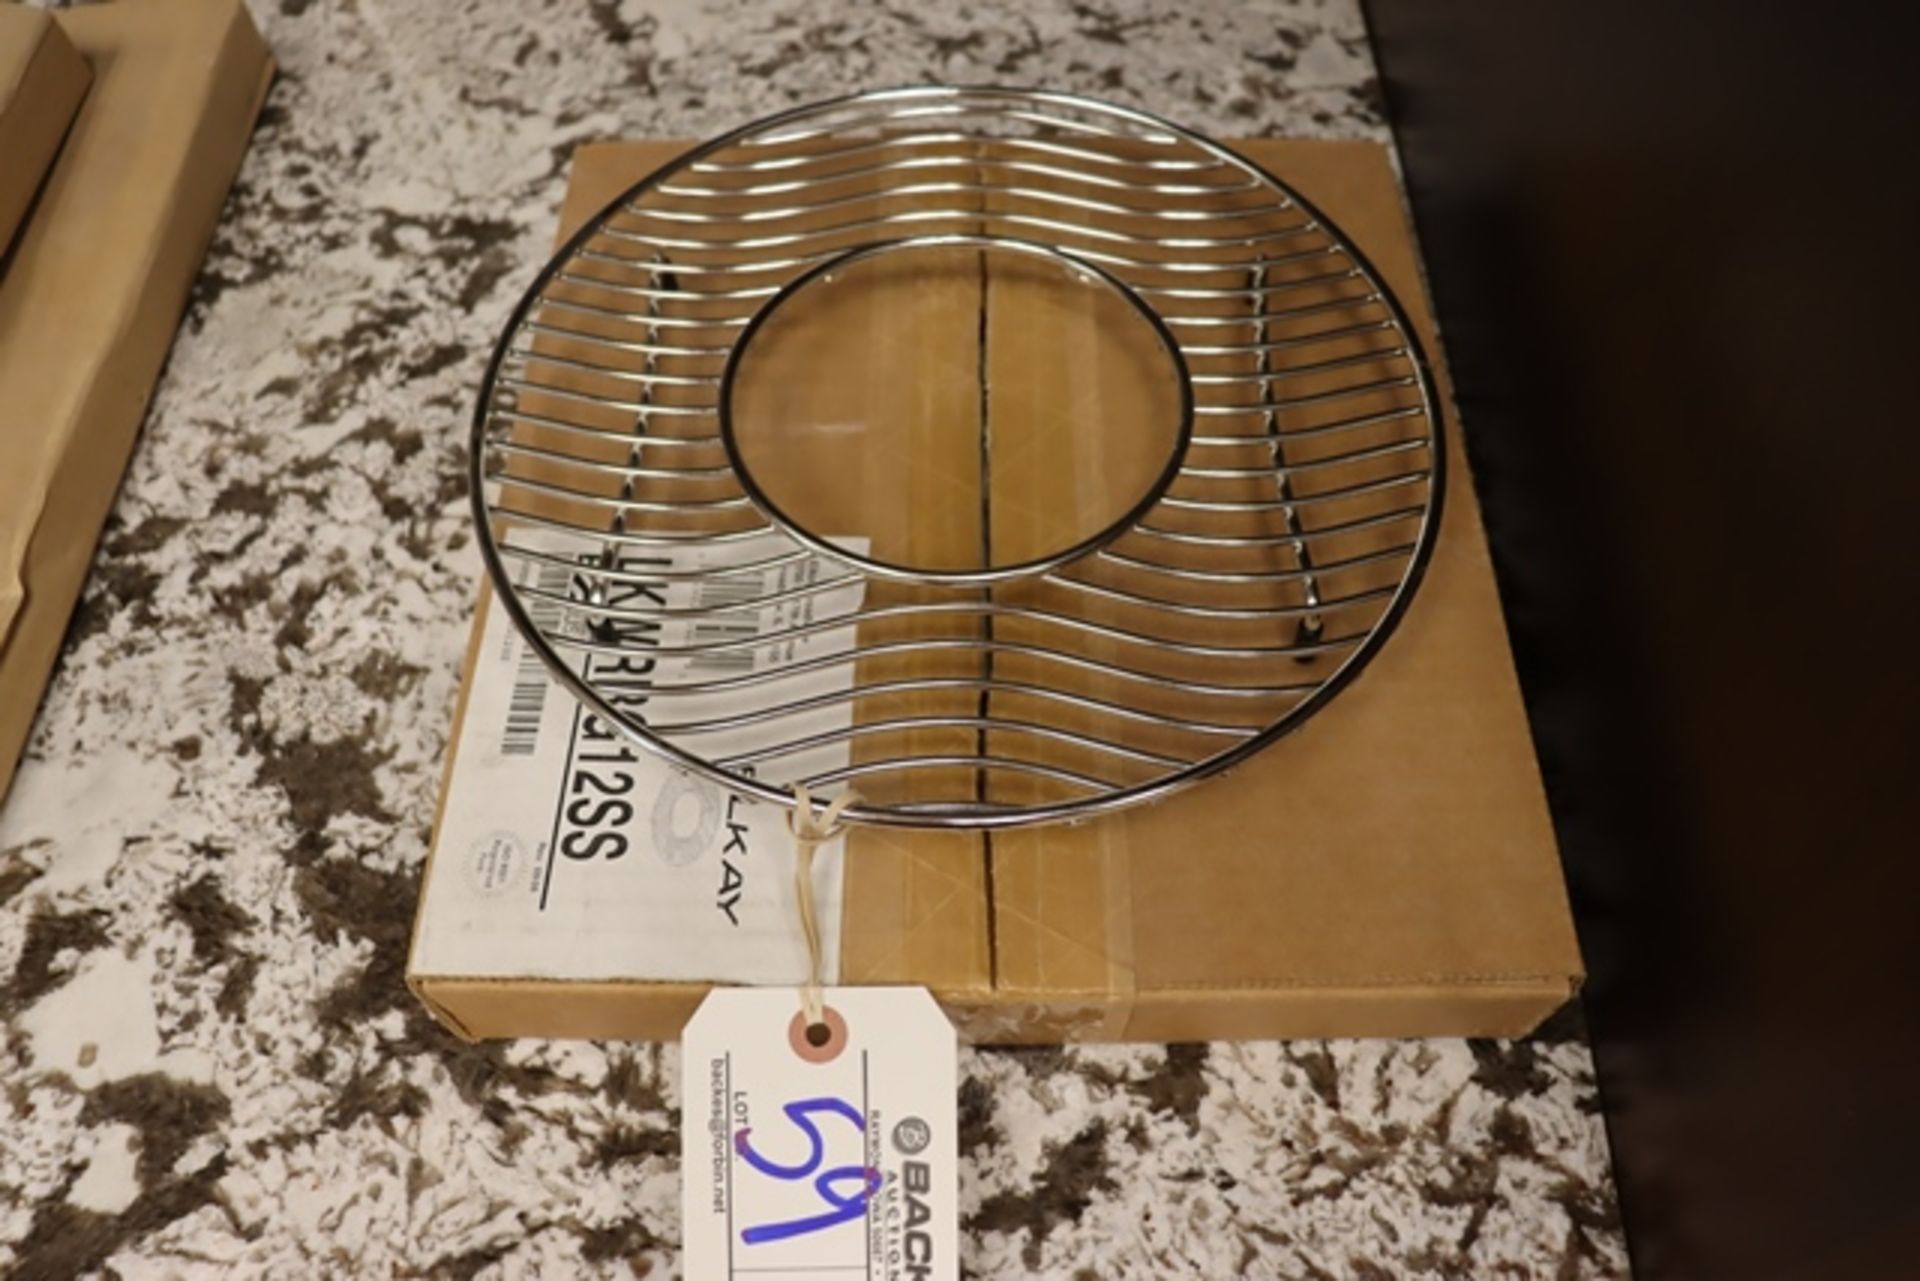 New Elkay 12" round stainless wire sink grids